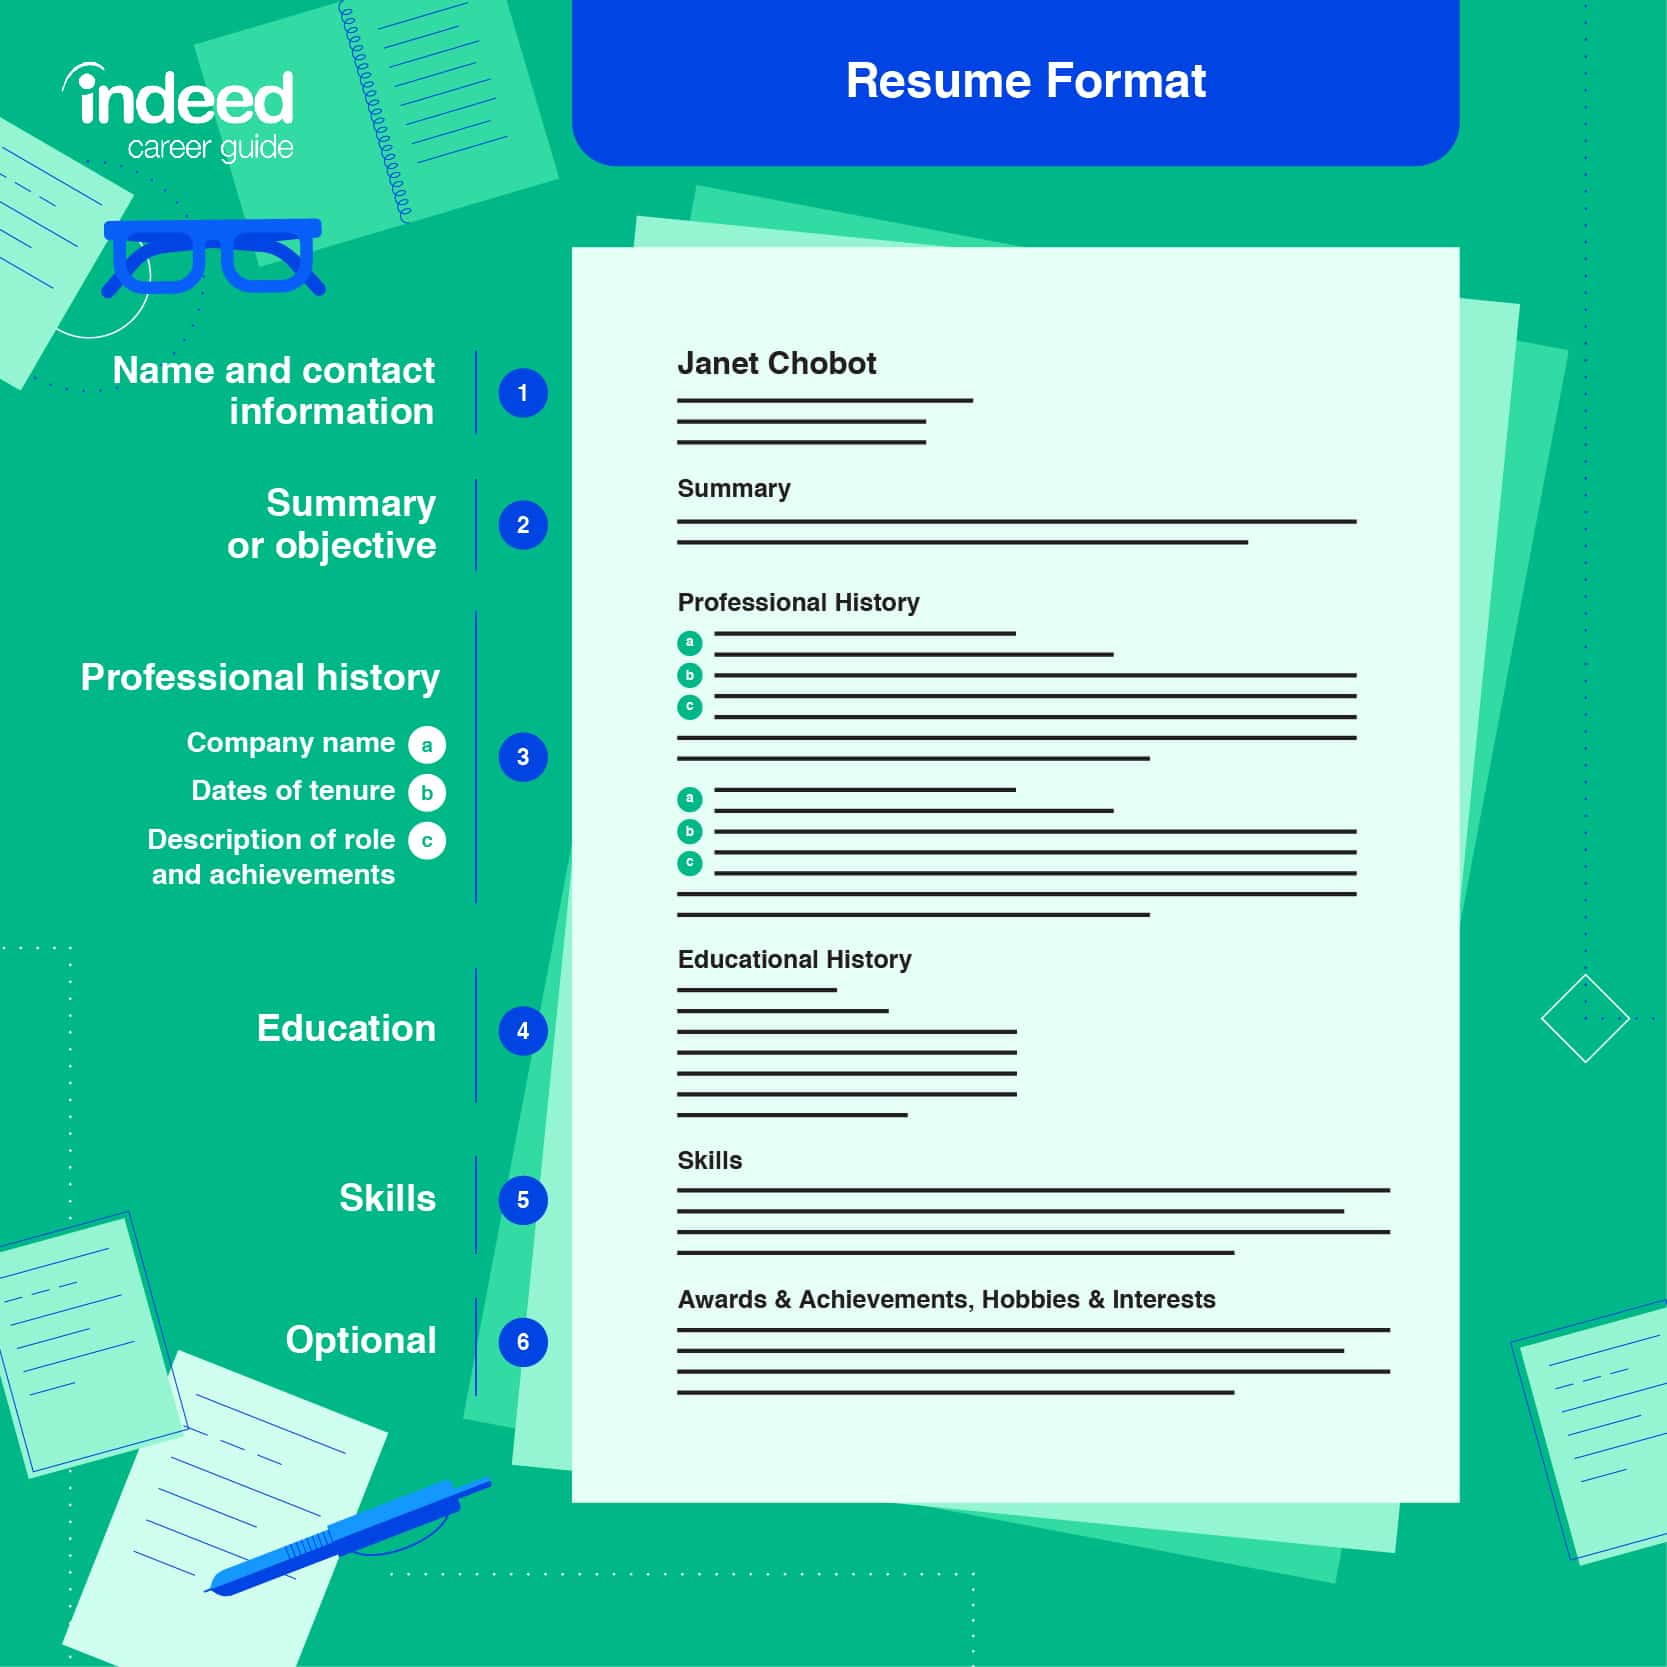 10 Resume Writing Tips to Help You Land a Job